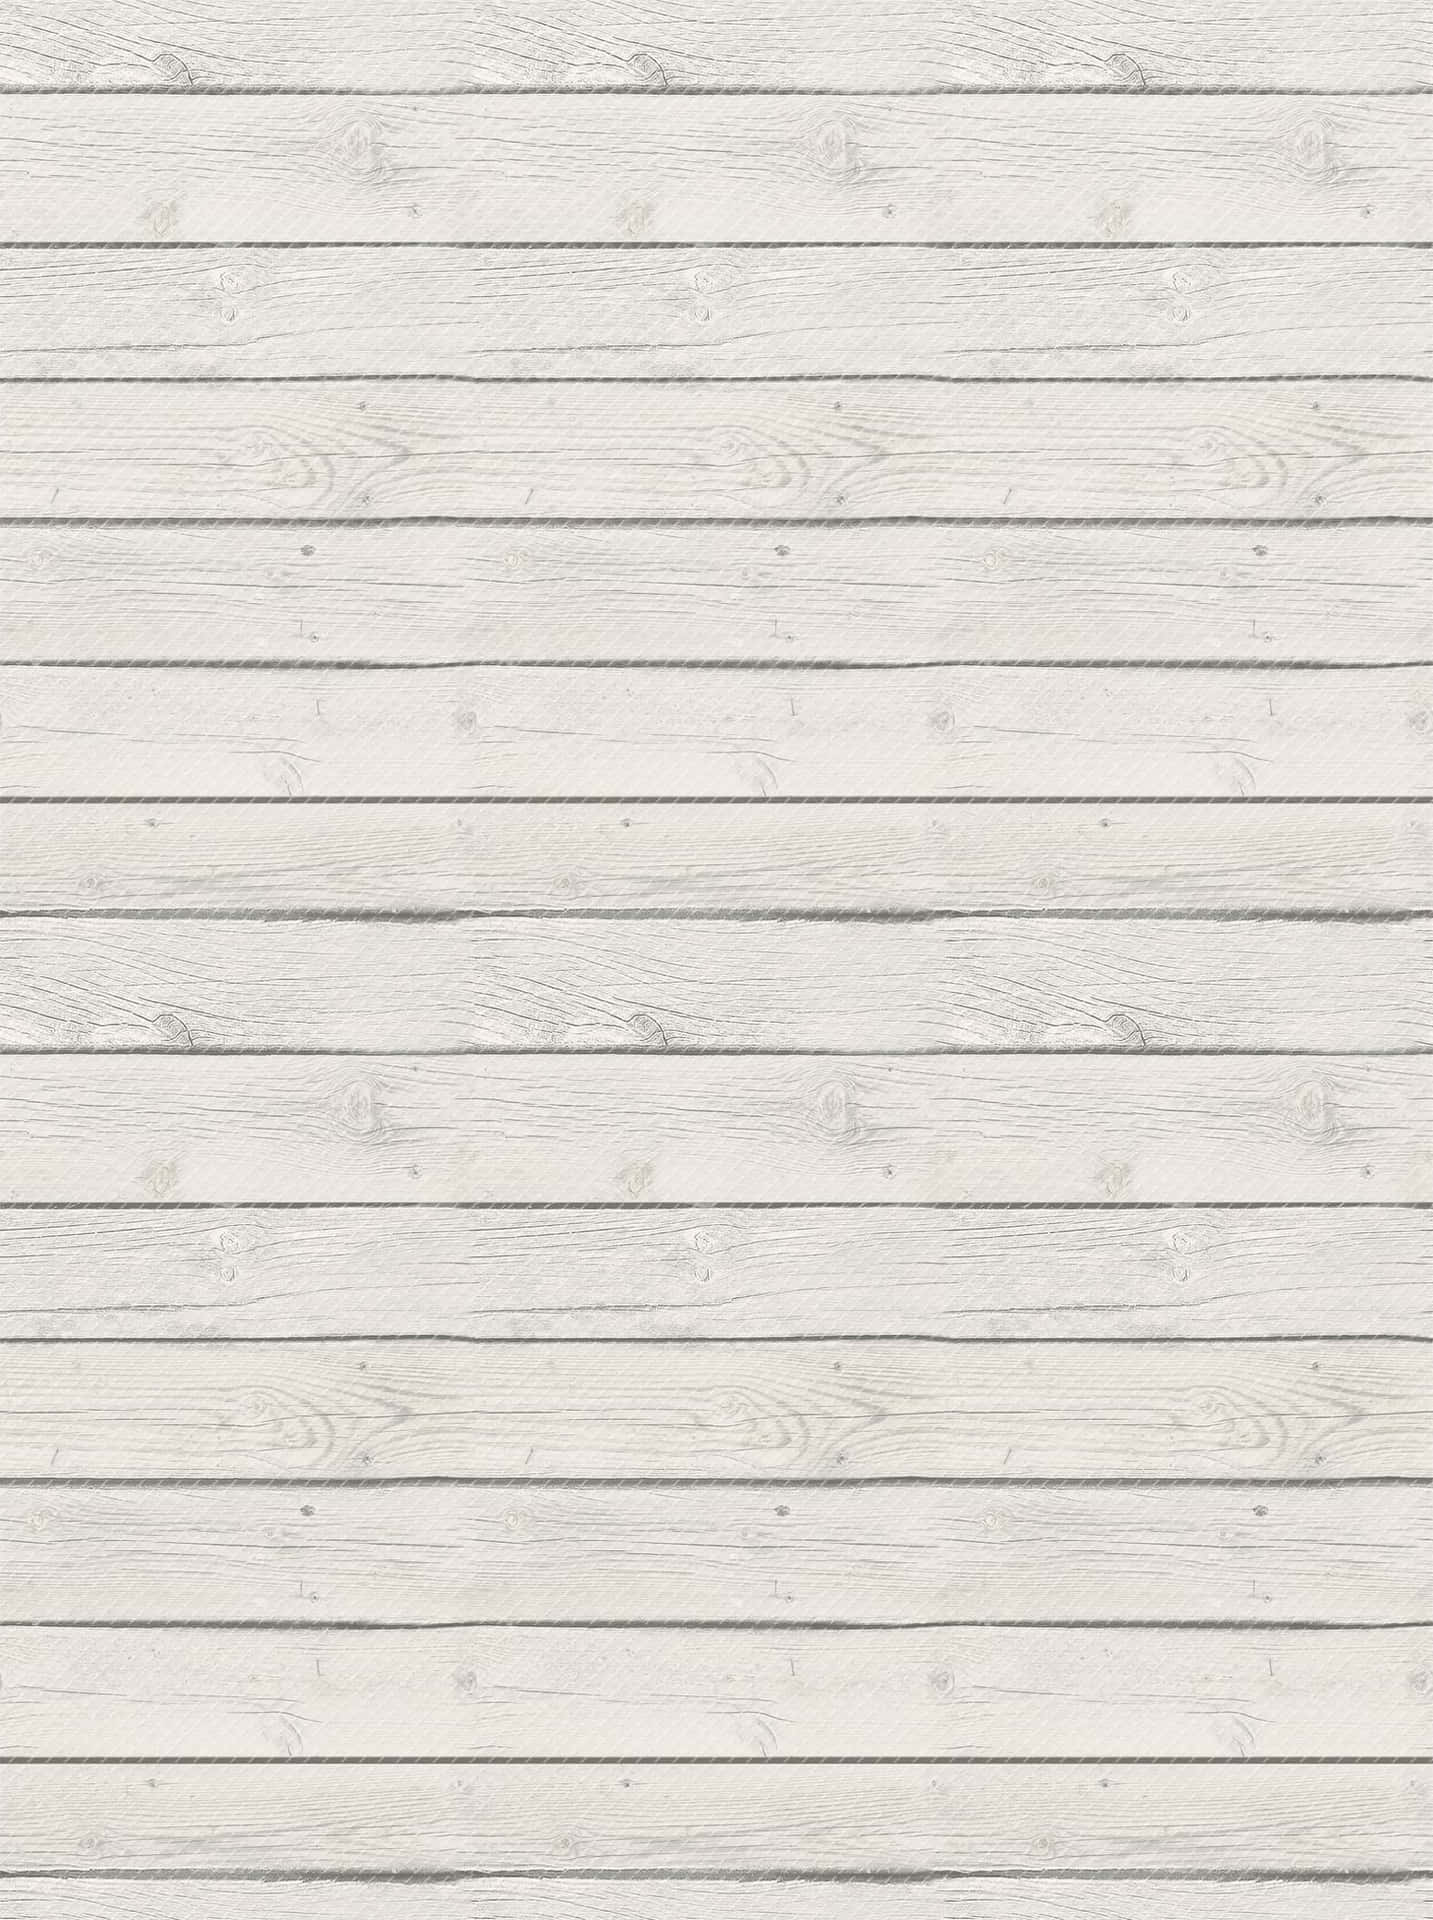 Thin Planks Of White Wood Background